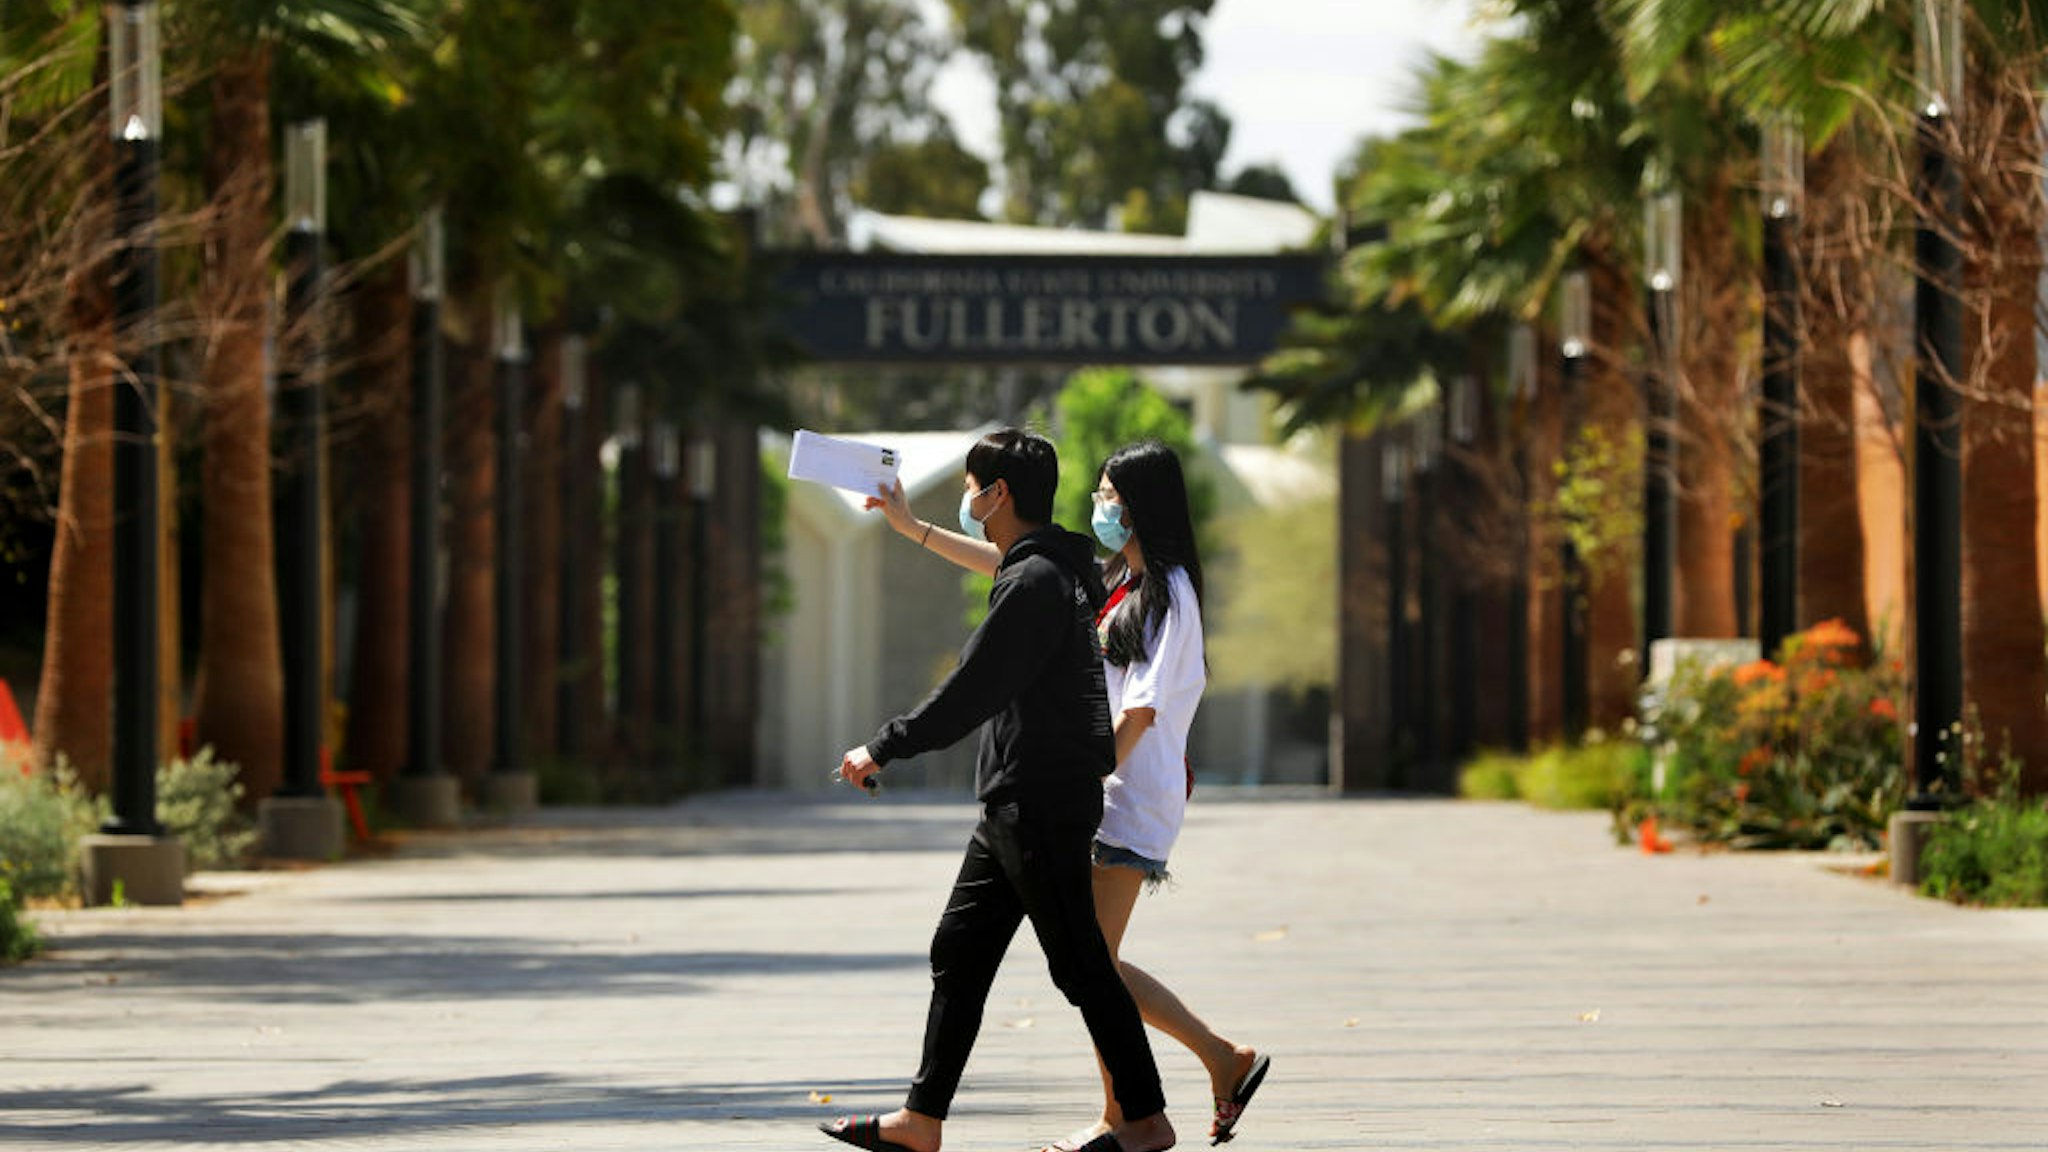 Cal State University Fullerton student Linh Trinh, 21, right, and her boyfriend Tan Nguyen, 21, walk around a deserted CSUF campus on Tuesday, April 21, 2020.